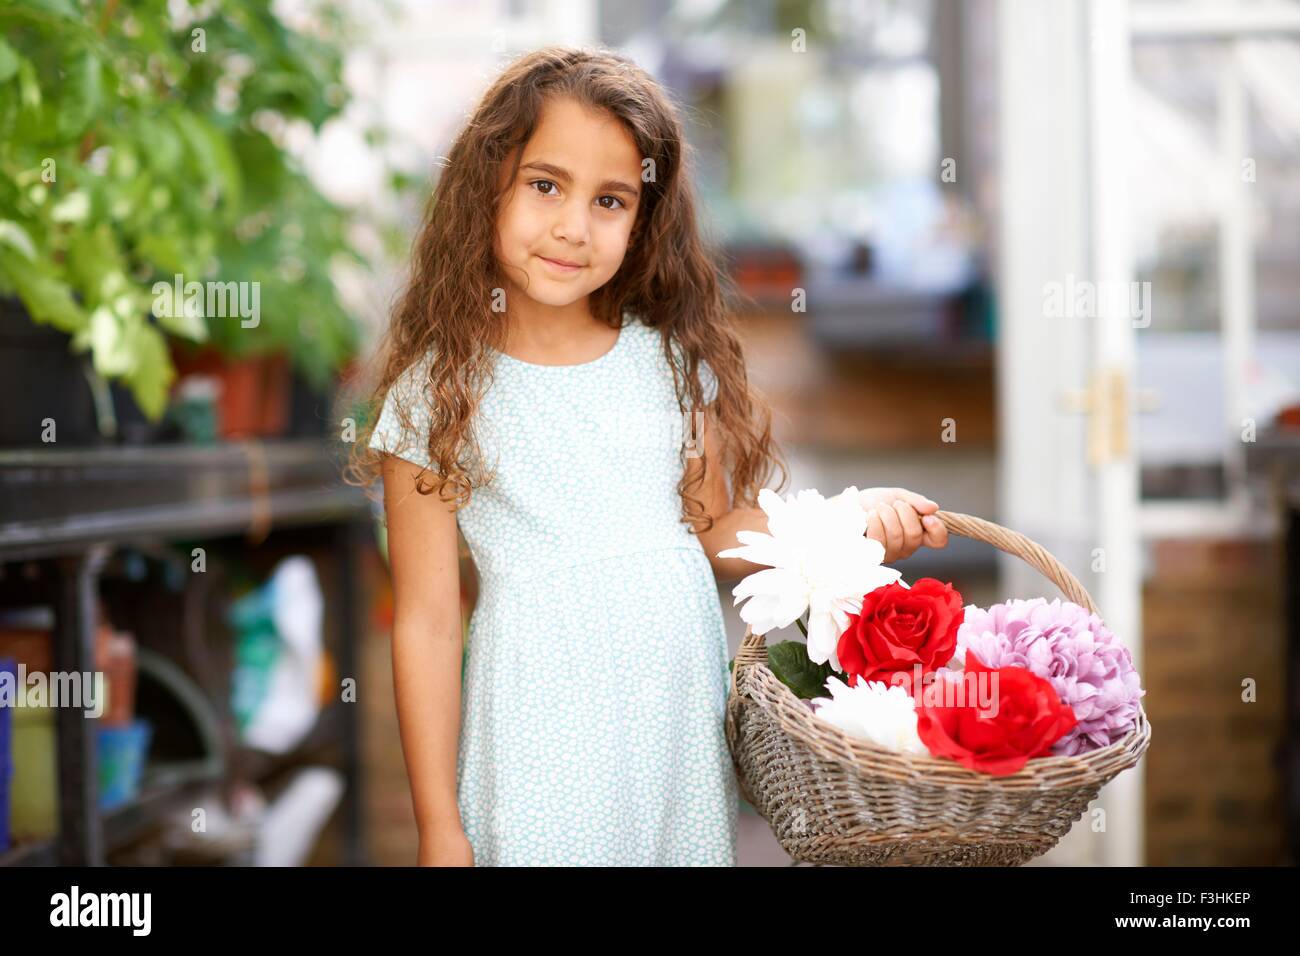 Cute girl holding basket of fresh flowers in greenhouse Stock Photo